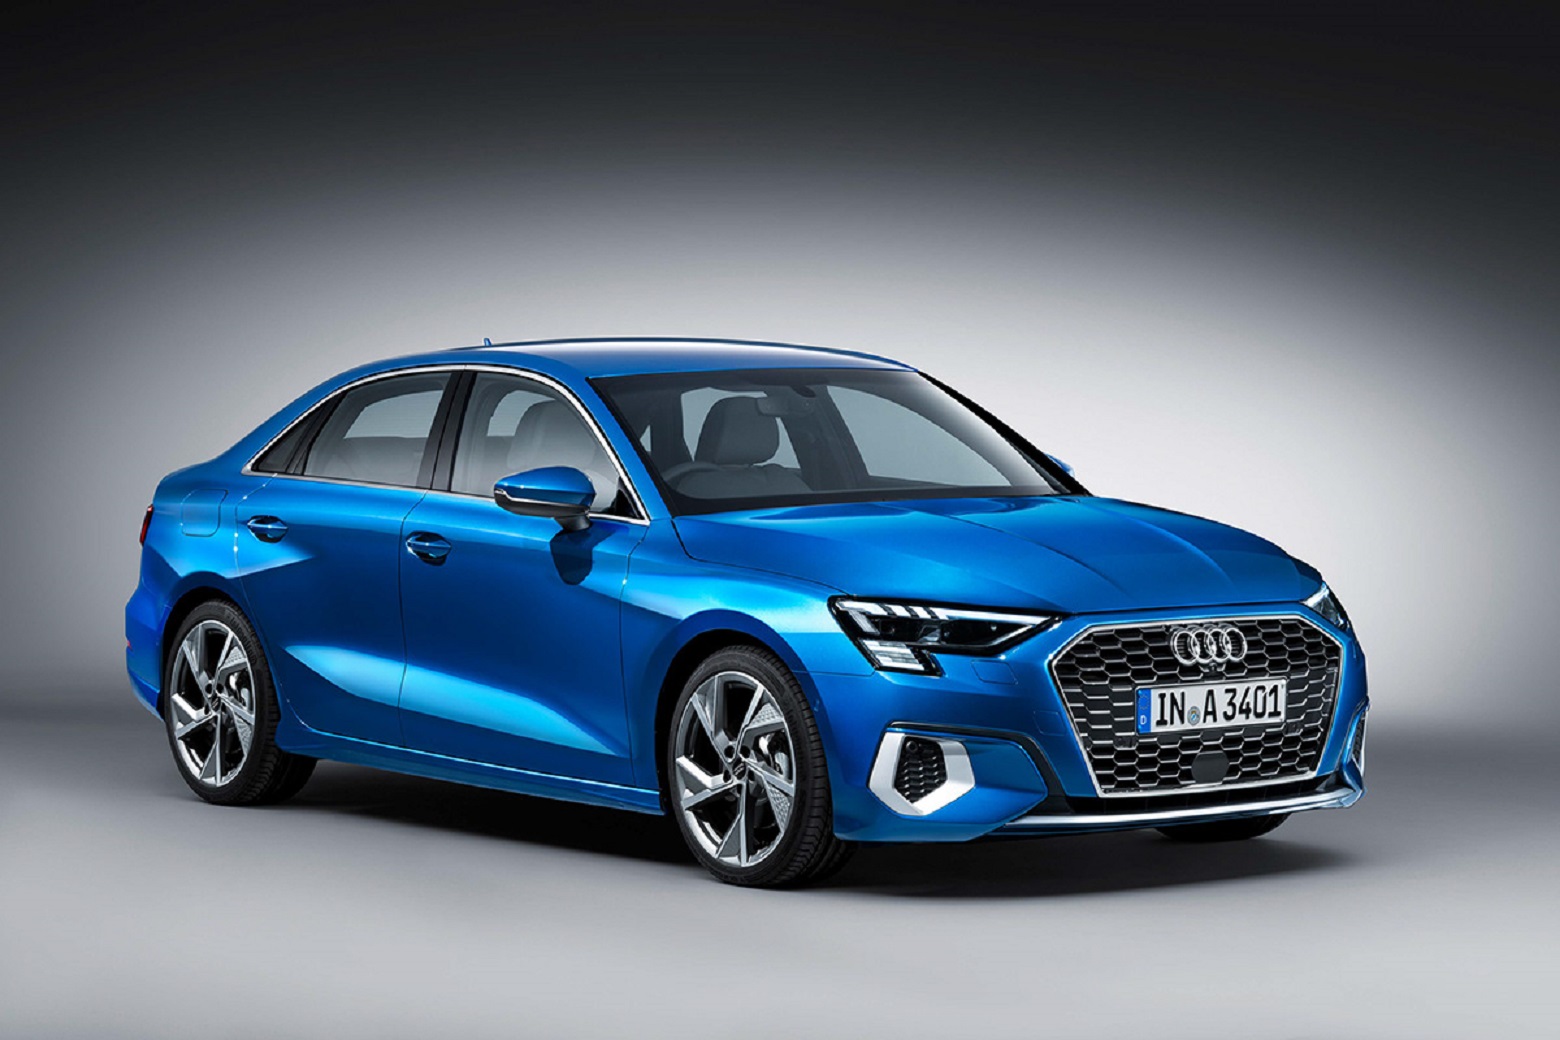 2021 Audi A3 Sedan Coming To America In Late 2020 With Standard 2.0L  Turbo-Four